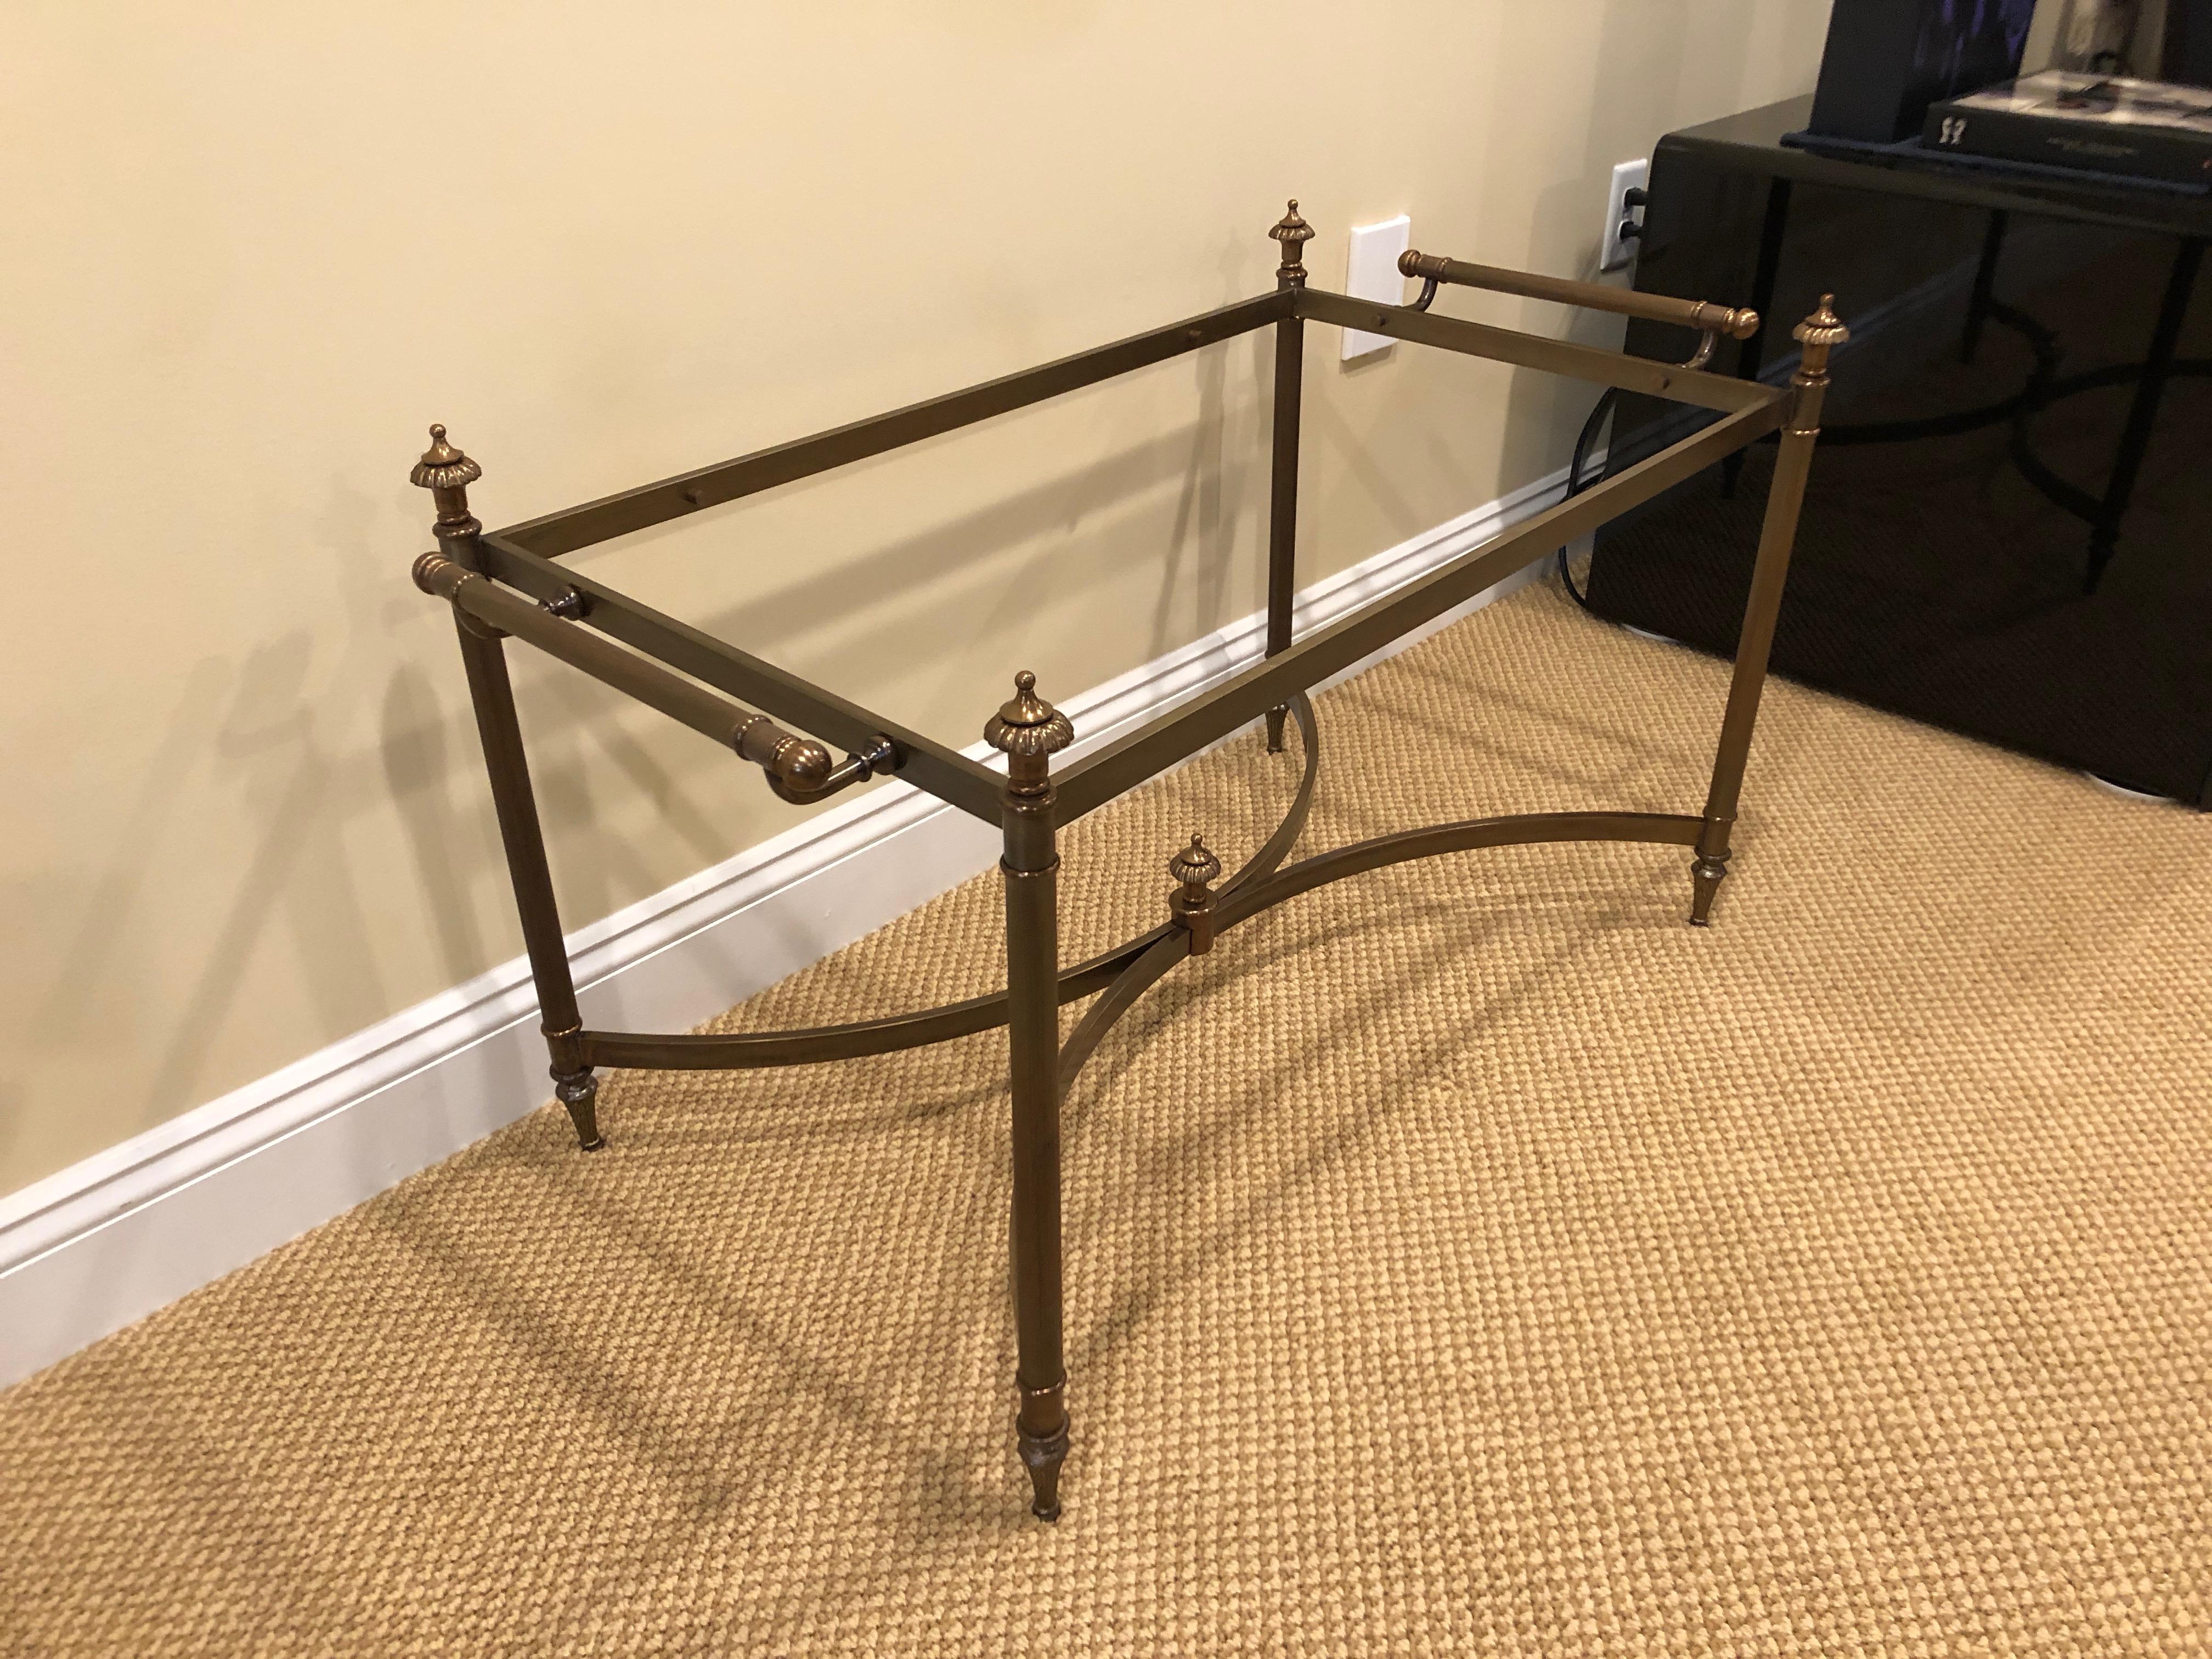 Classically elegant bronze finish coffee table with beveled glass top, having two handles and decorative finials in the corners and underneath in the center of the stretcher bars.
Measures: Height to top of glass is 19.5.